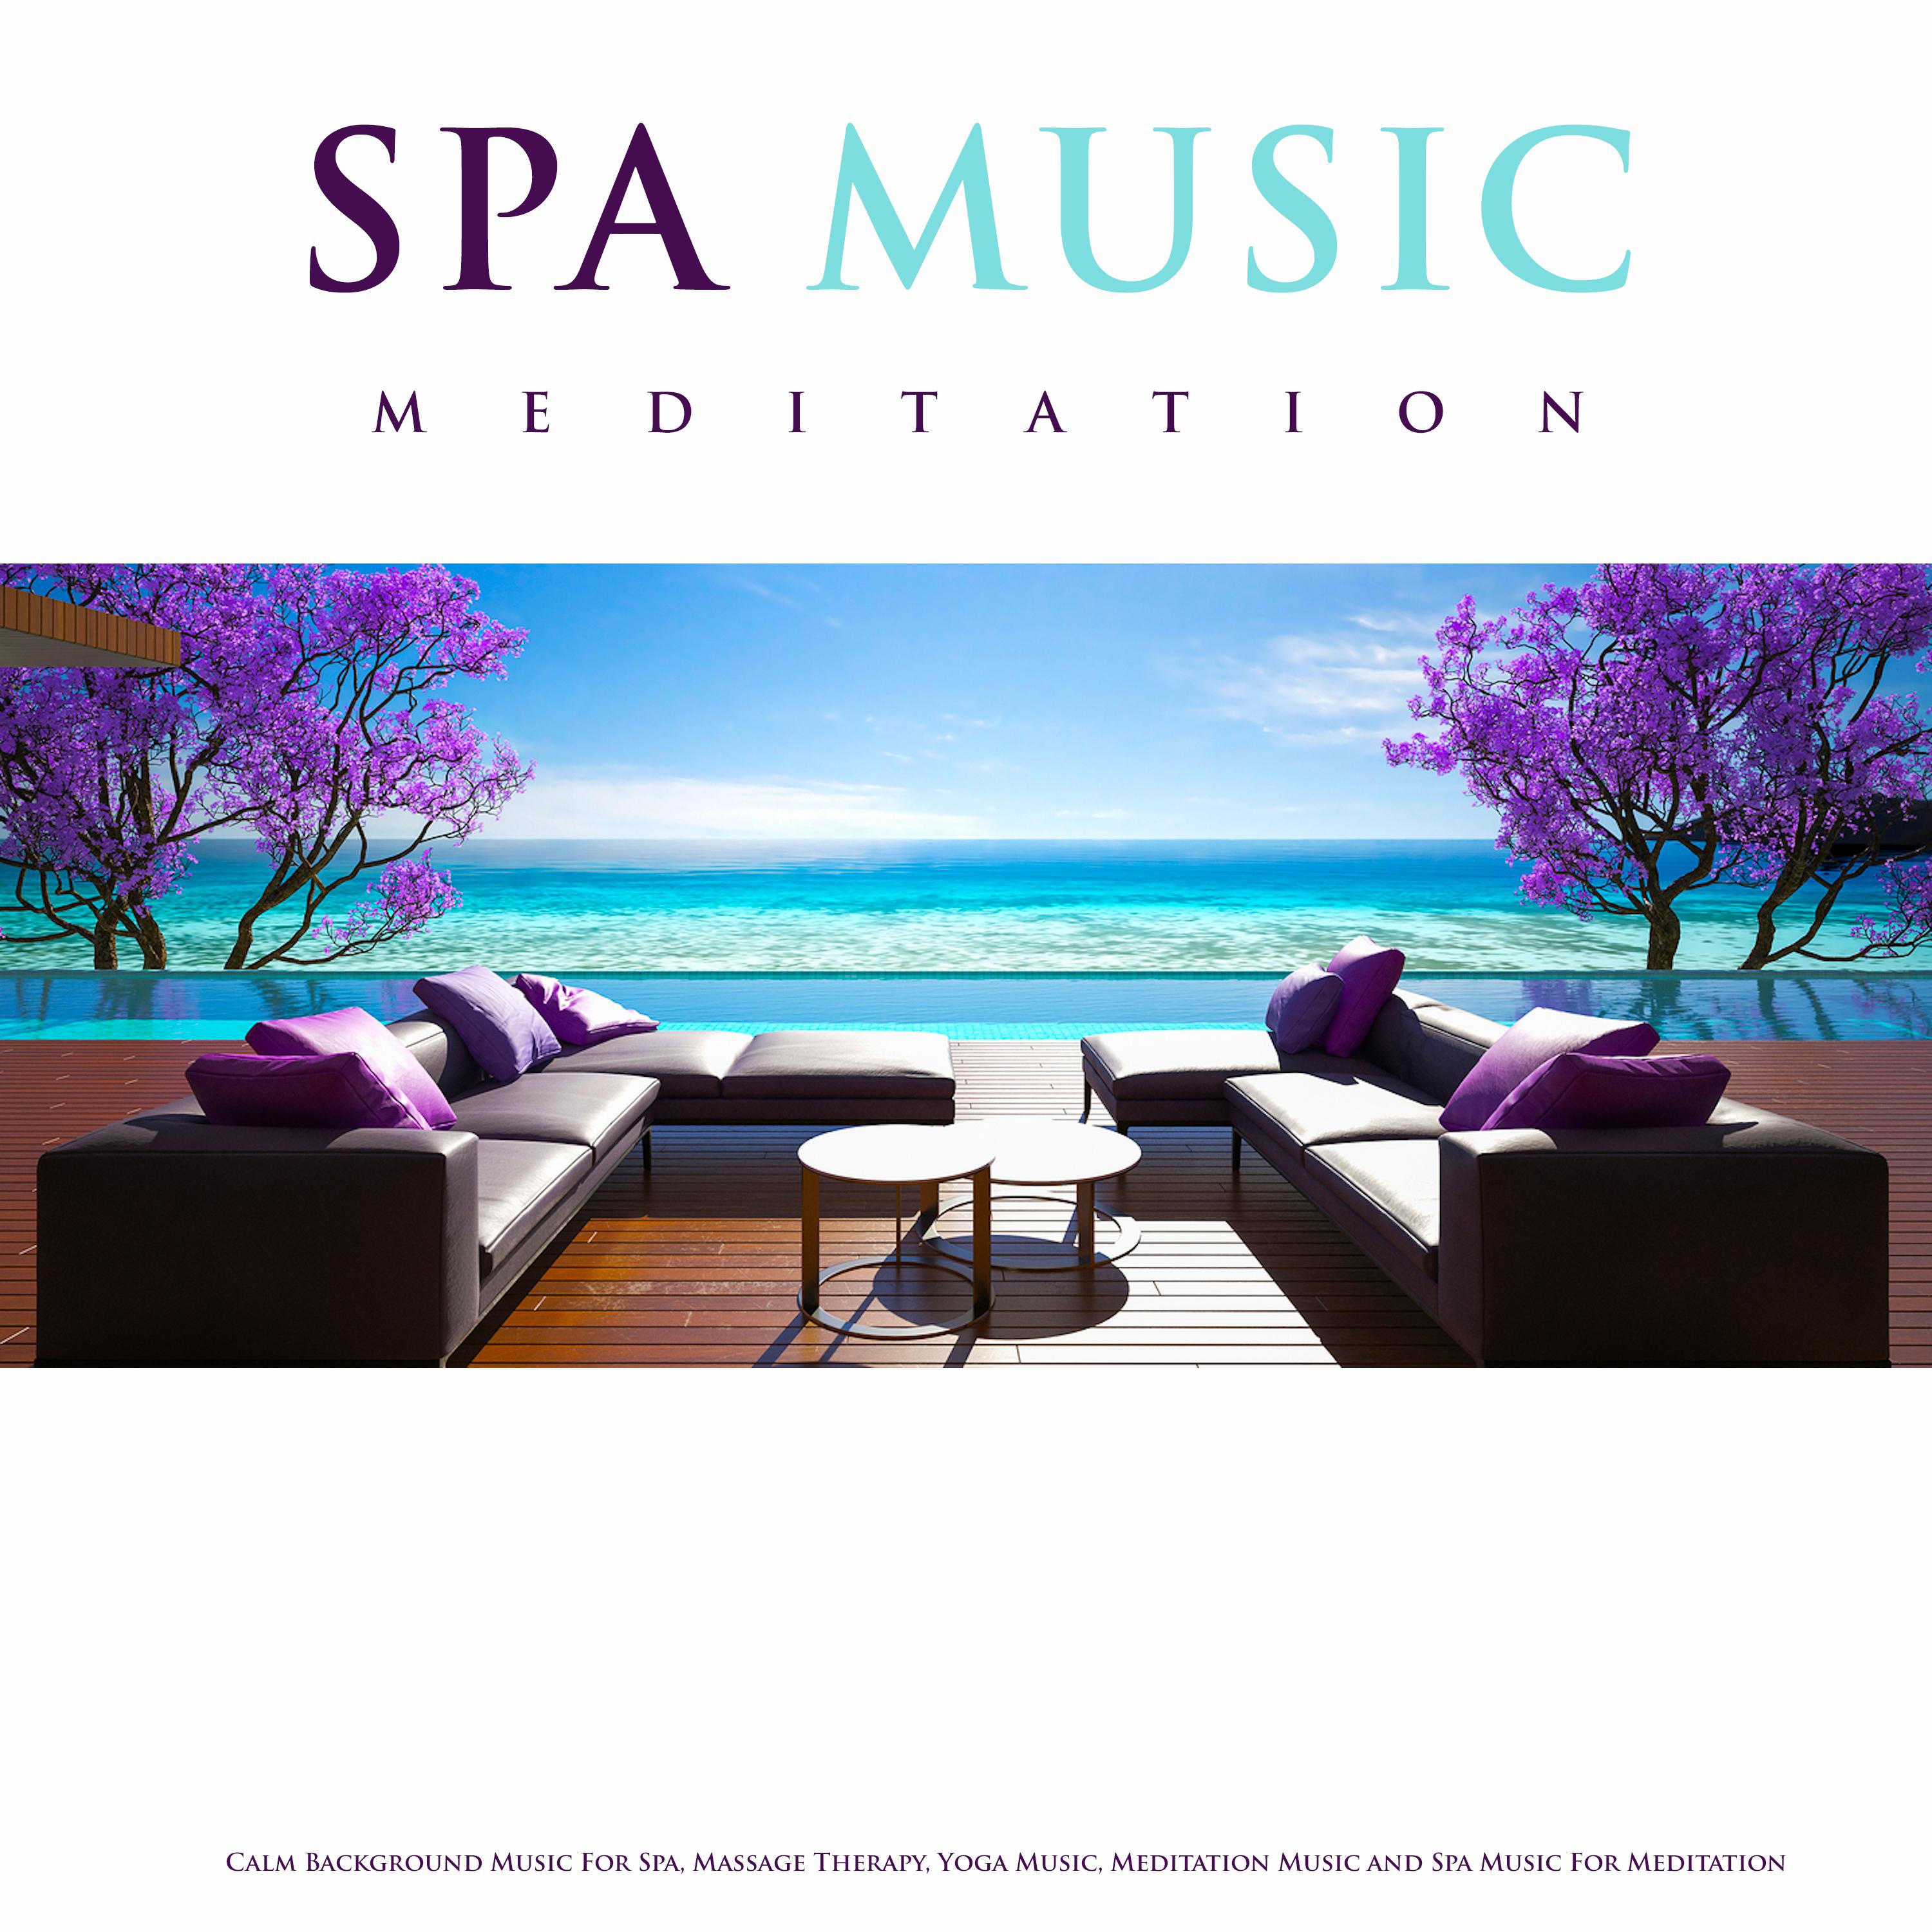 Spa Music Meditation: Calm Background Music For Spa, Massage Therapy, Yoga Music, Meditation Music and Spa Music For Meditation